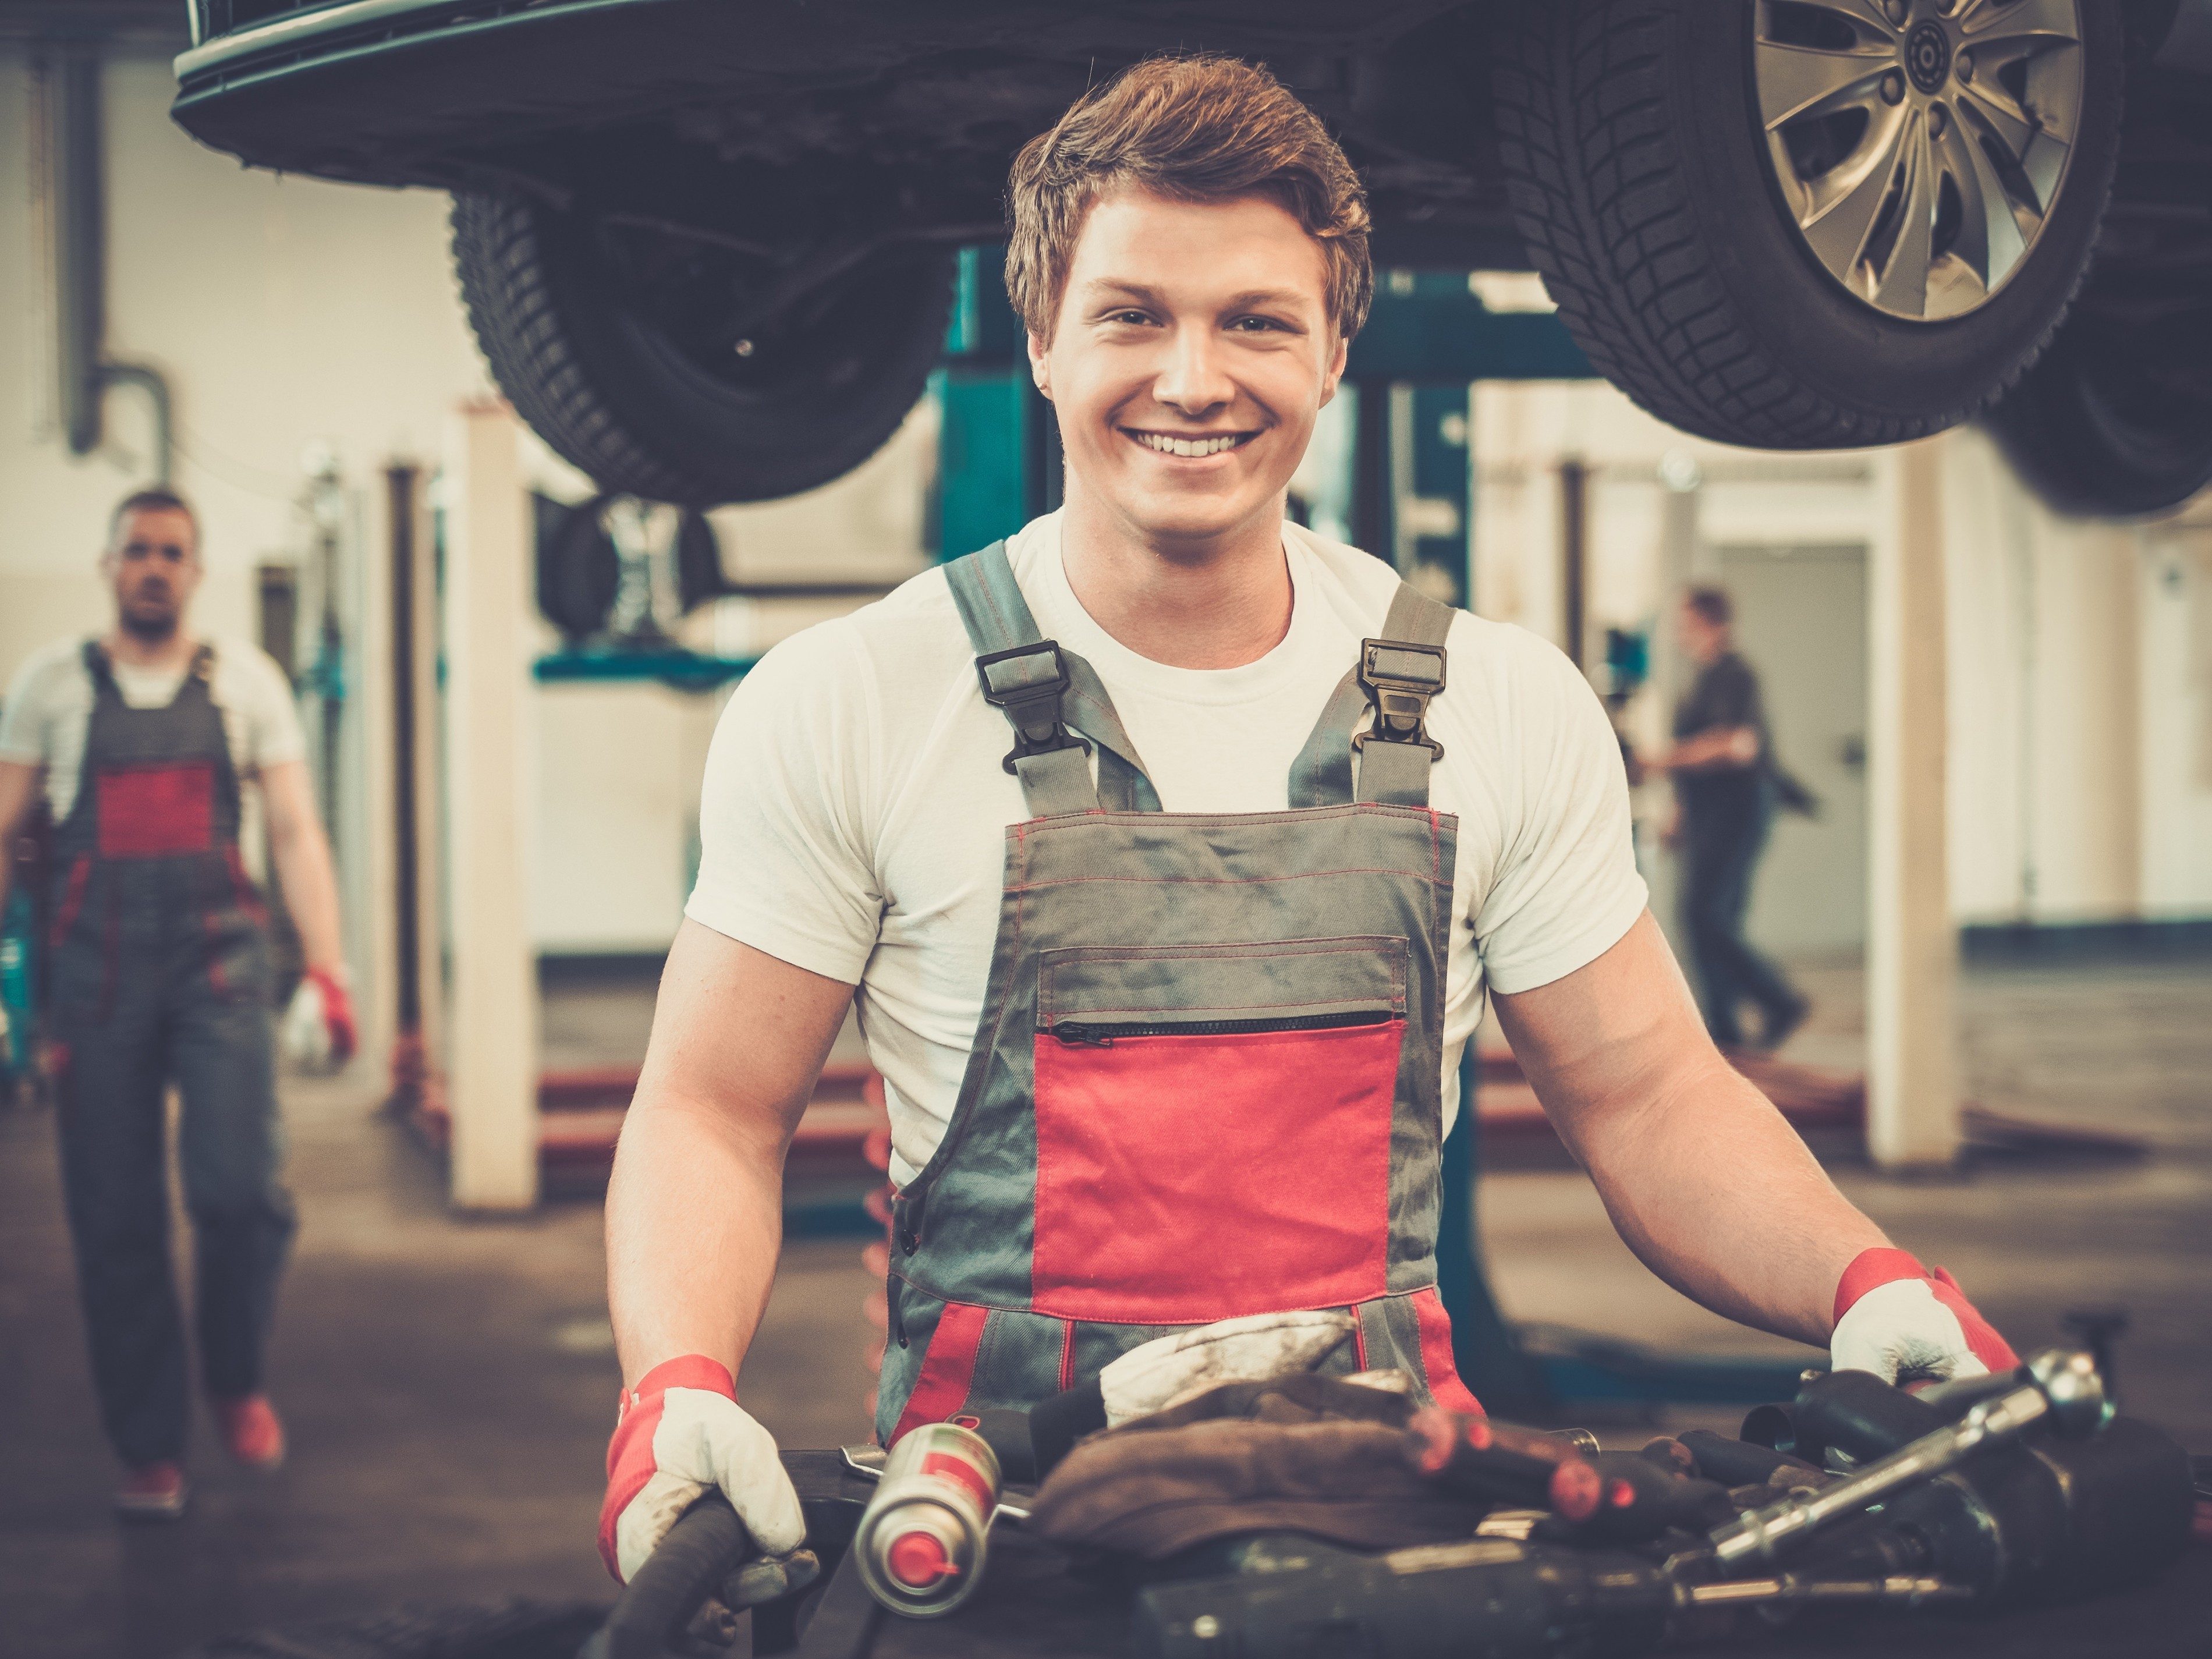 4. Ask Friends and Family for Mechanic Referrals